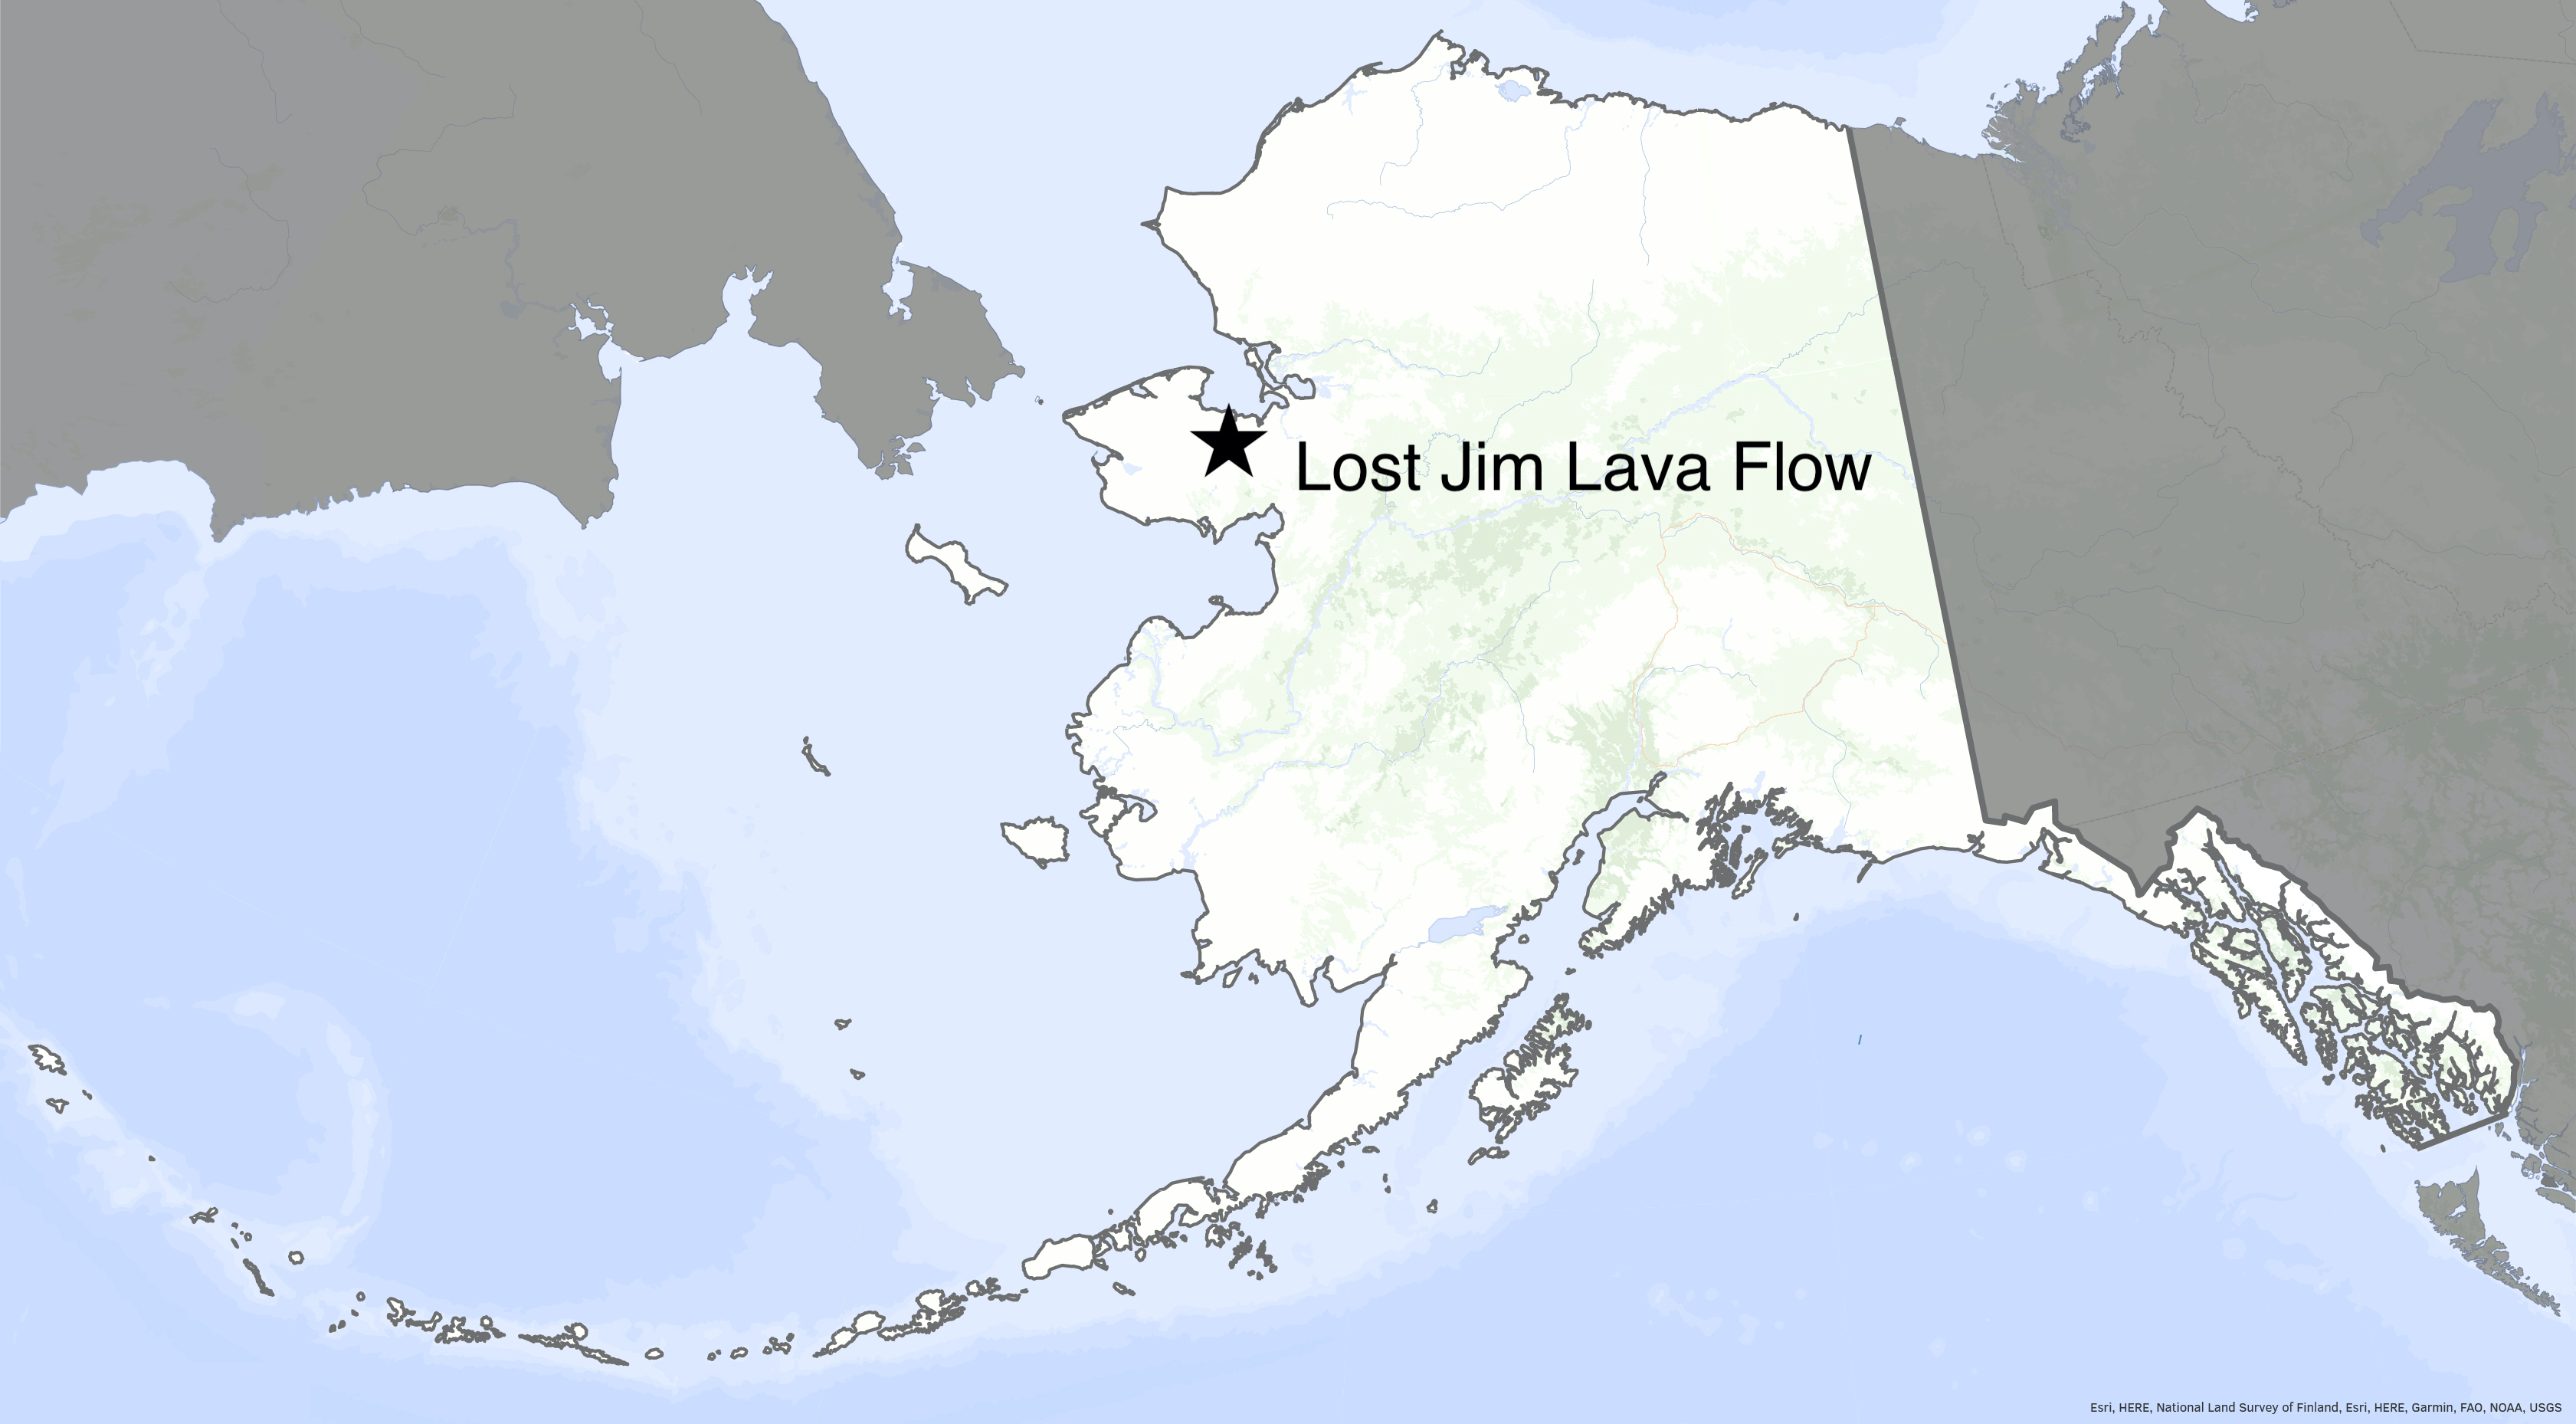 A star on the Seward Peninsula on a map of Alaska marks the location of the Lost Jim Lava Flow.